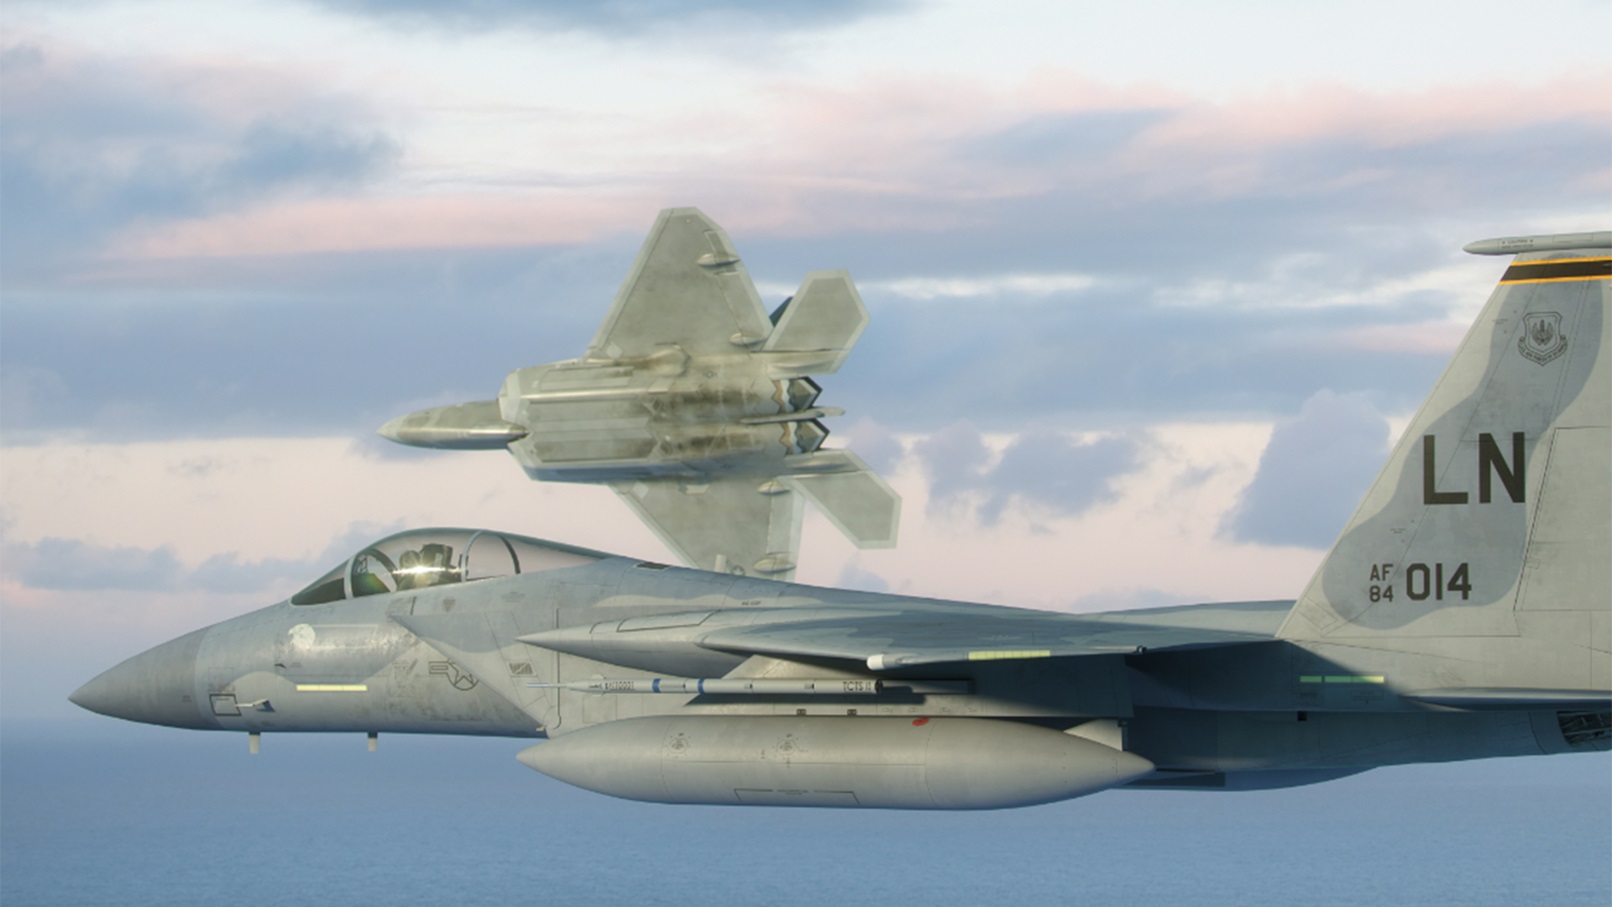 U.S. Air Force joins U.S. Navy TCTS Inc. II program to field next-generation air combat training solution from Collins Aerospace